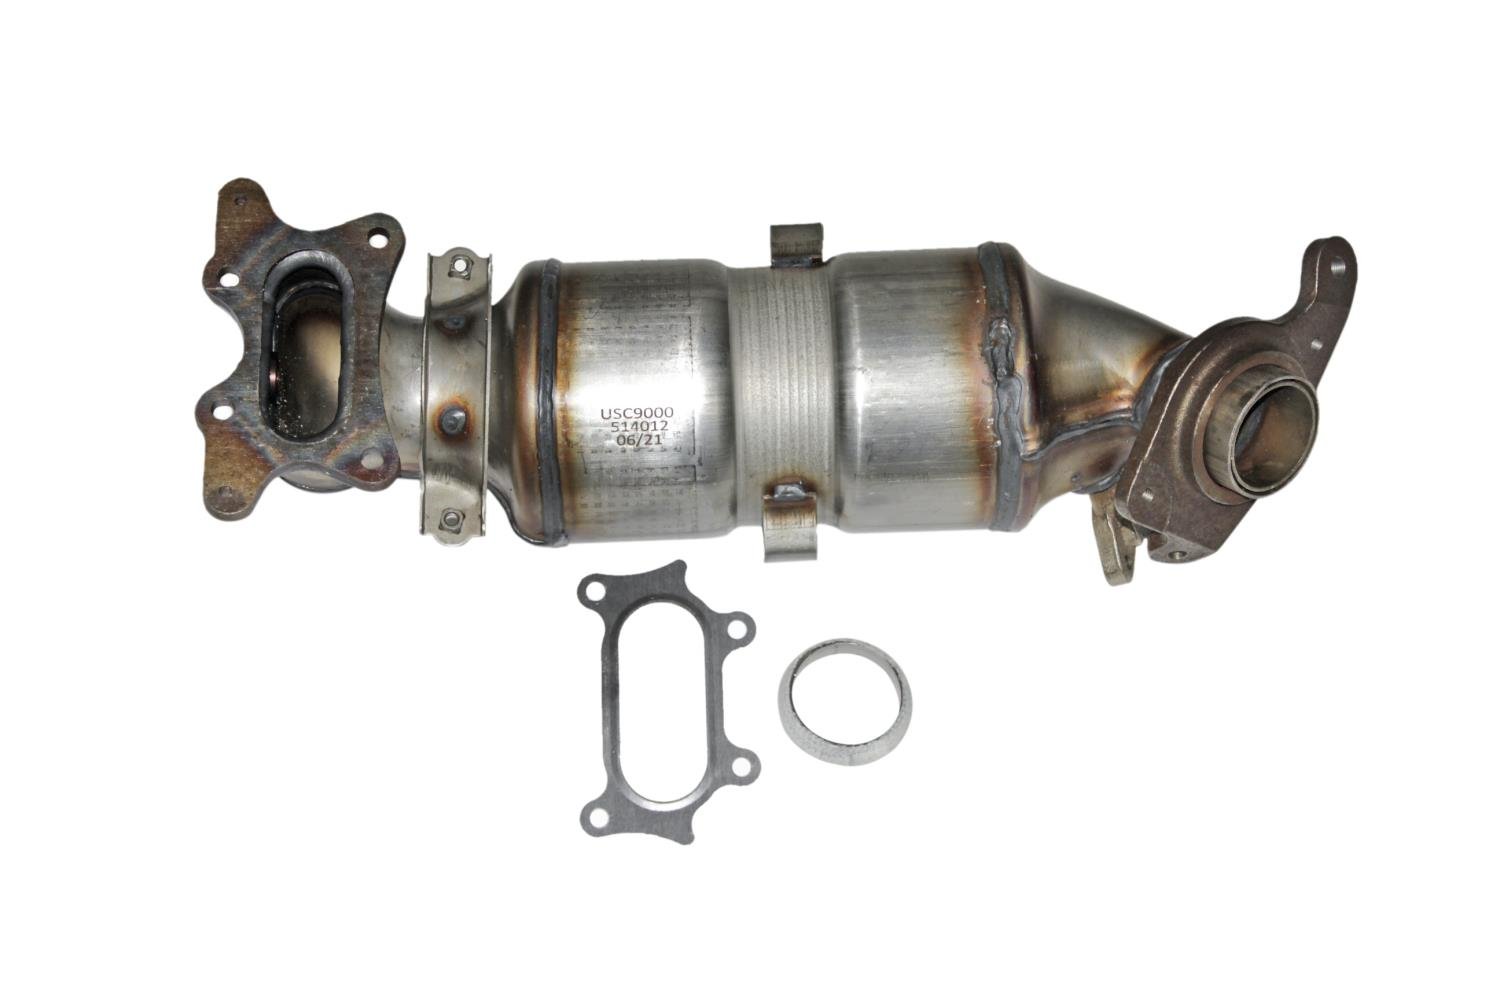 Catalytic Converter Fits 2006-2011 Honda Civic w/1.8L 4 cyl. Eng. [Front]